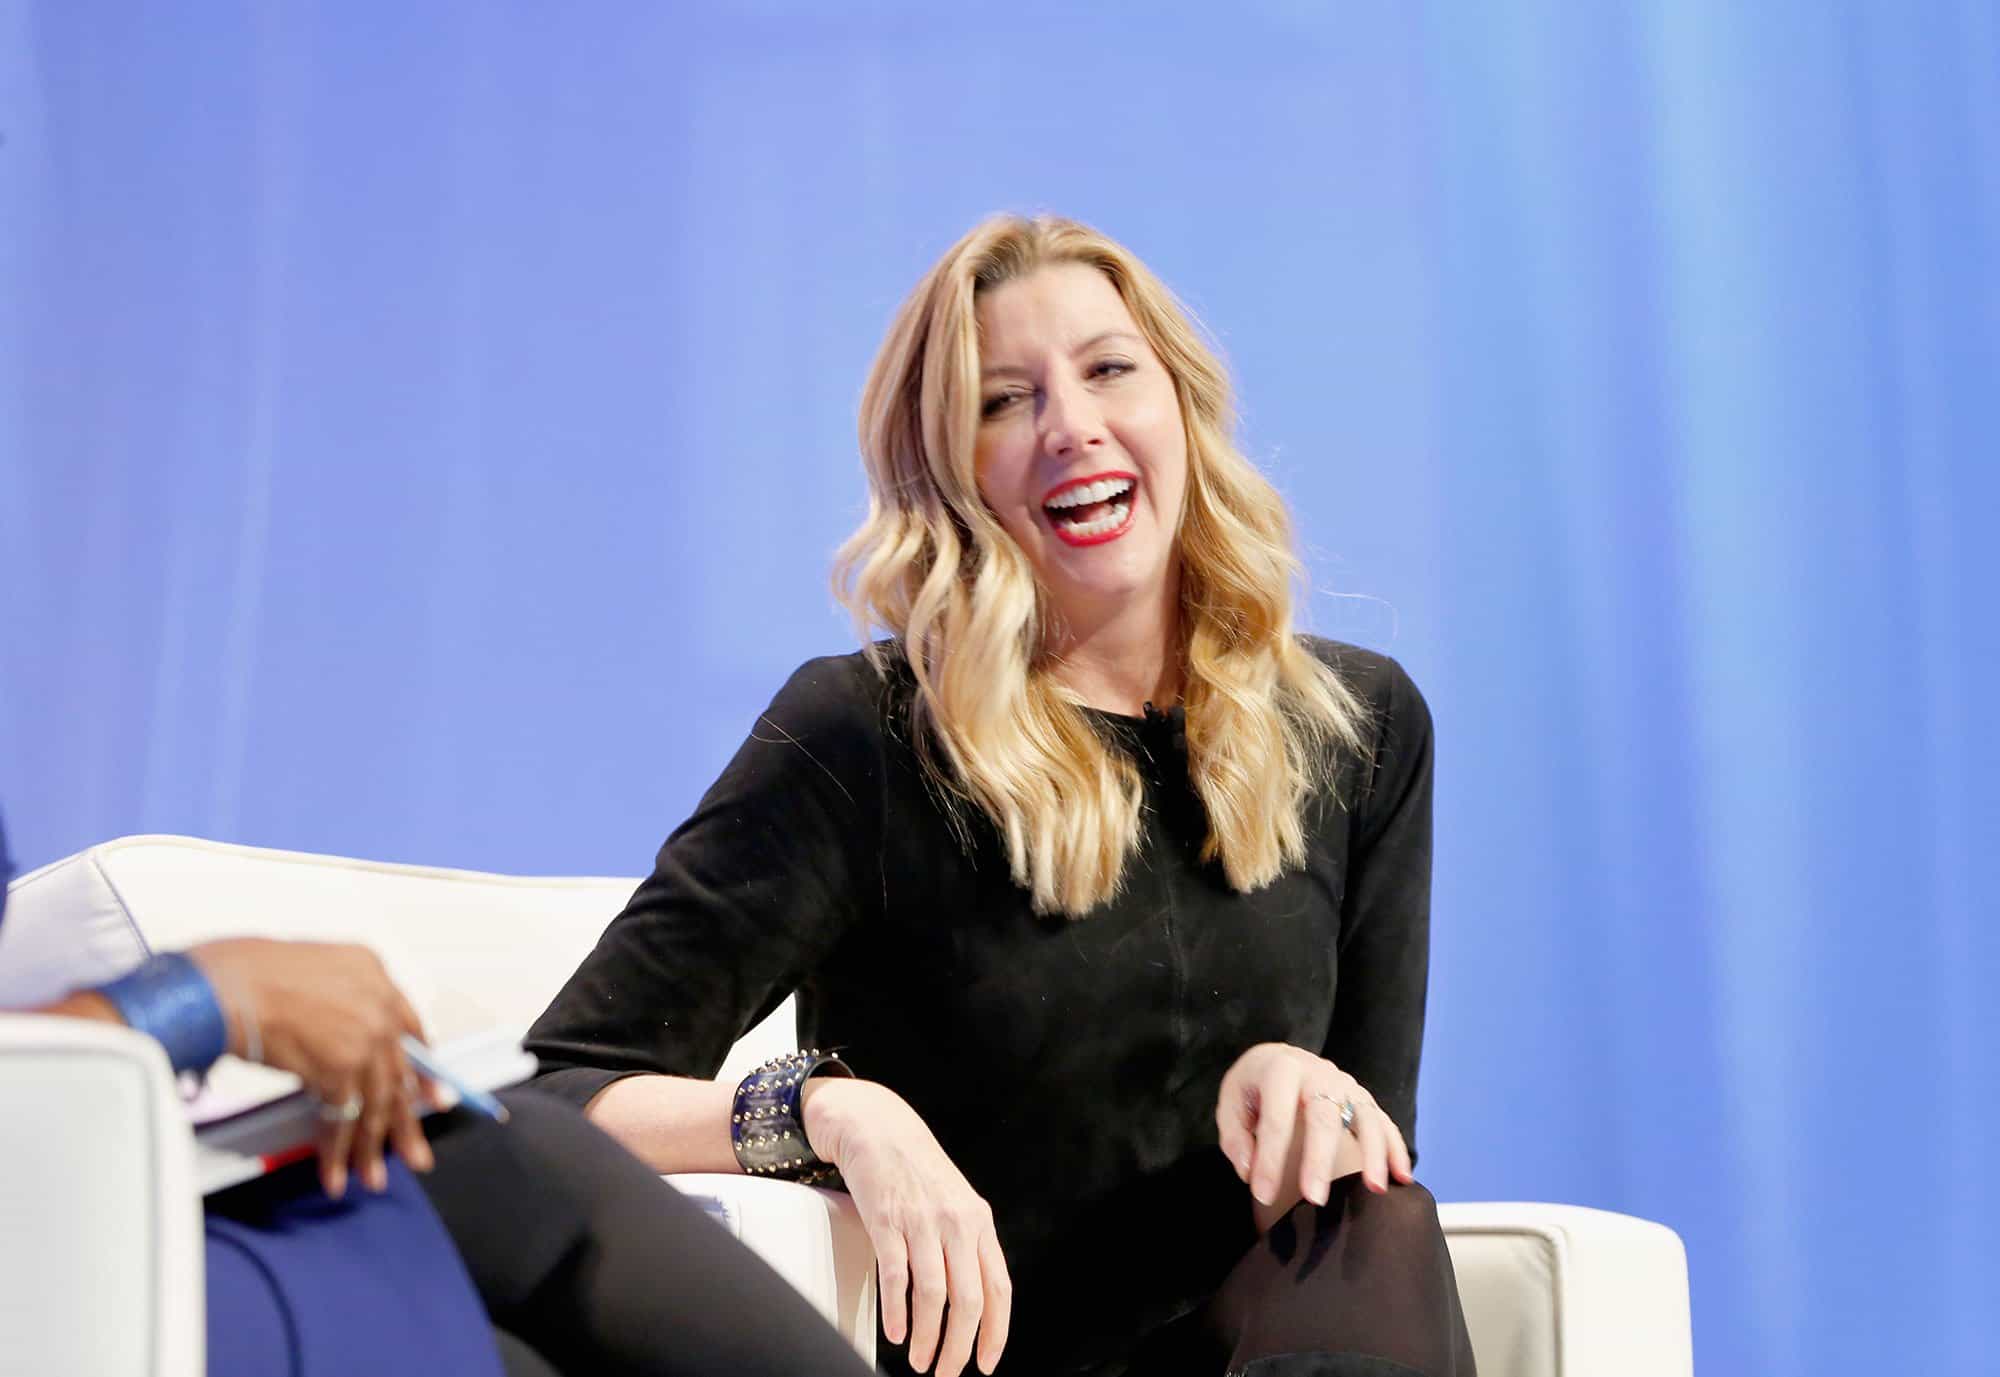 Aiming for Failure Helped Sarah Blakely Build Her Spanx Empire